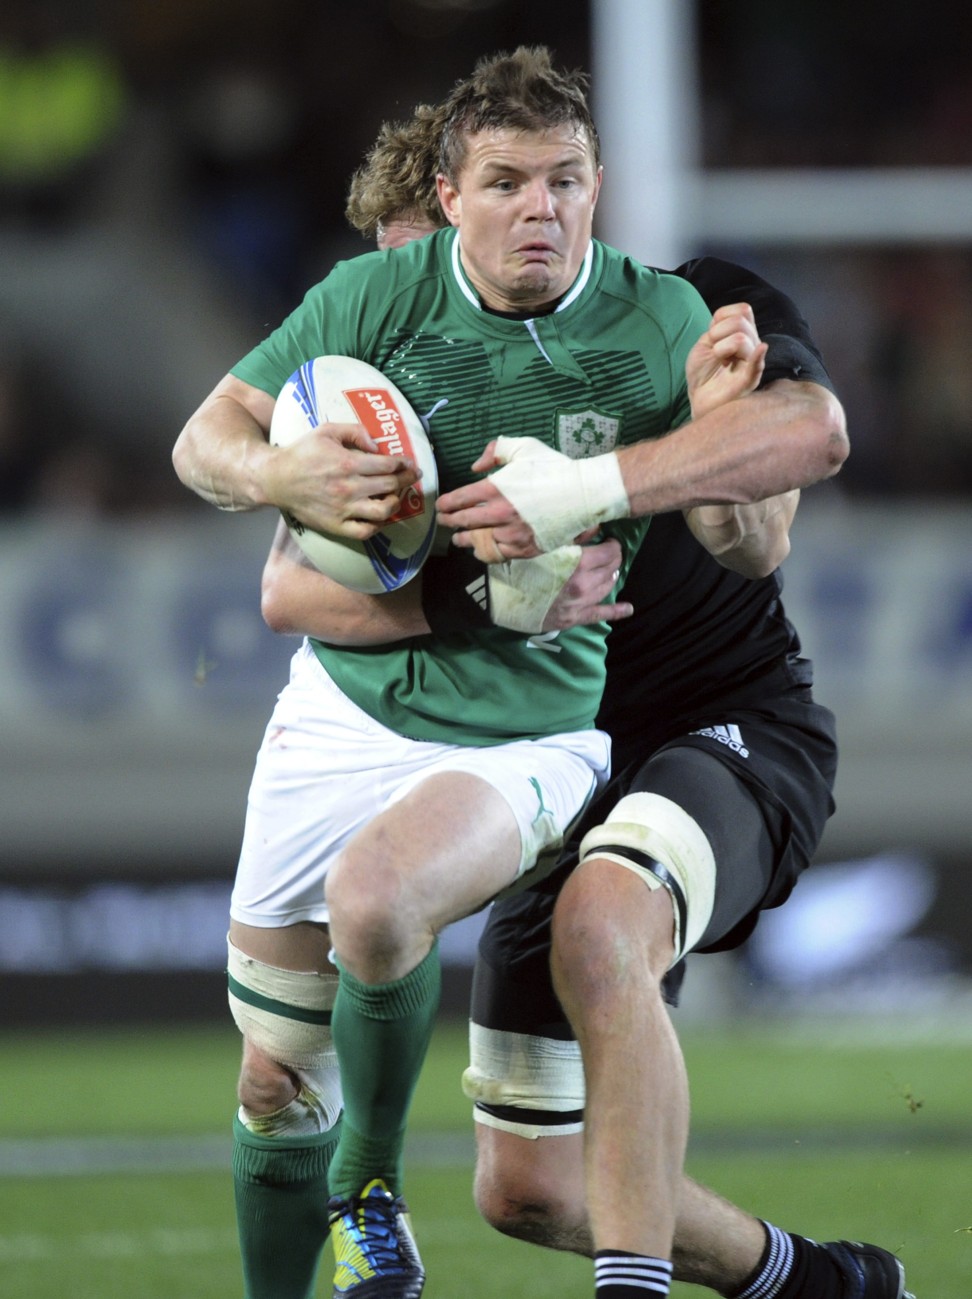 The thrill of playing elite rugby was preceded by “pretty horrendous” preseason training, a form of endurance, says Brian O’Driscoll, pictured on the charge against the All Blacks for Ireland at Eden Park, Auckland in 2012. Photo: AP